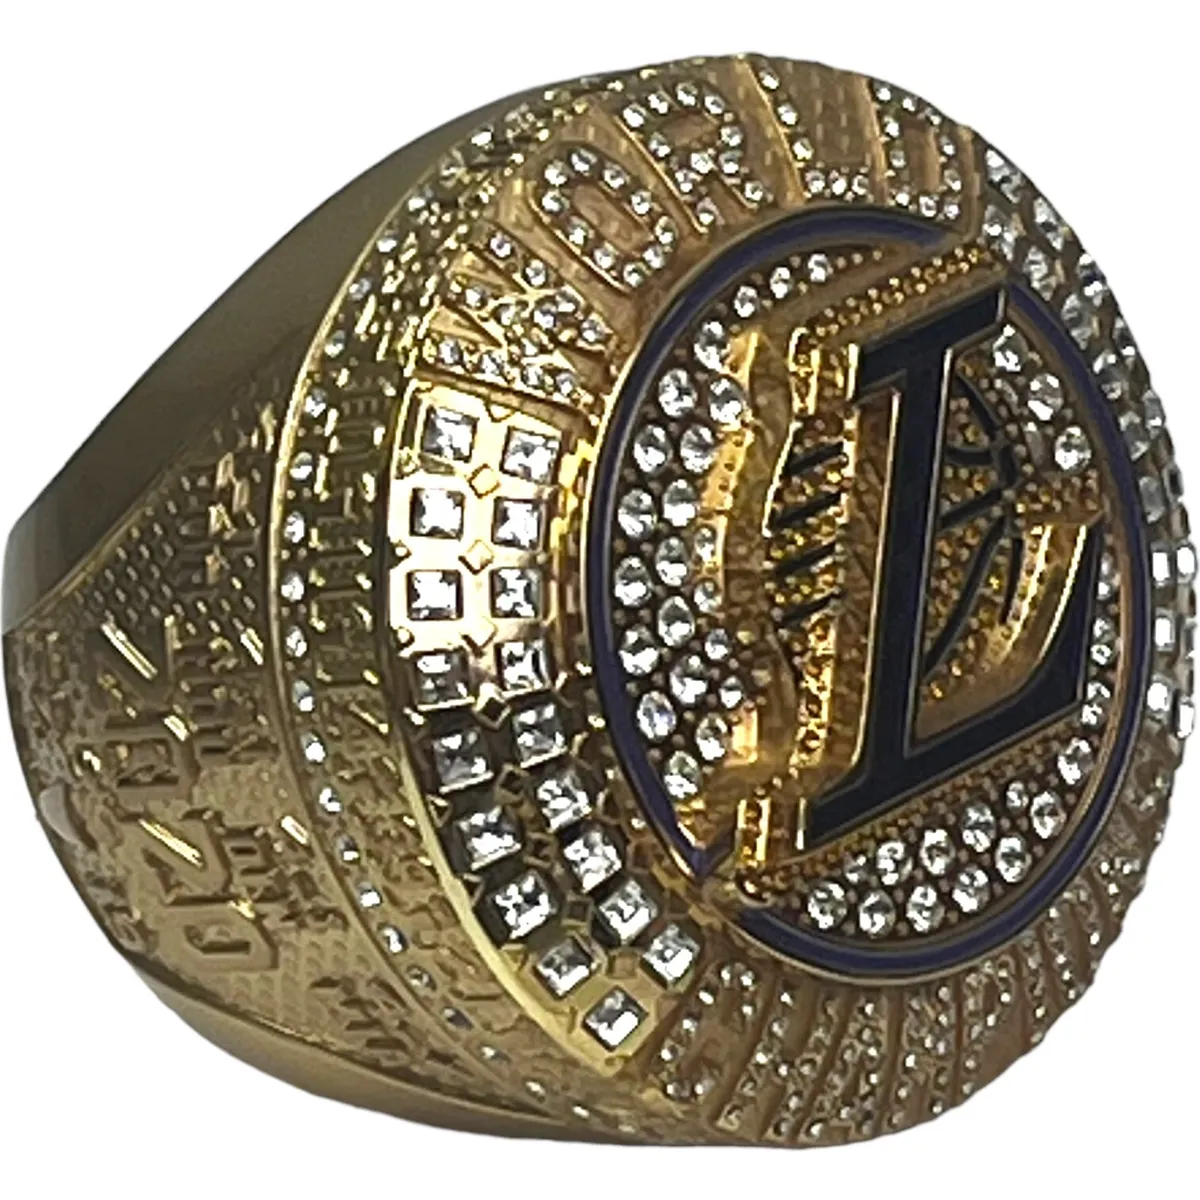 Los Angeles Lakers 2020 Championship Ring